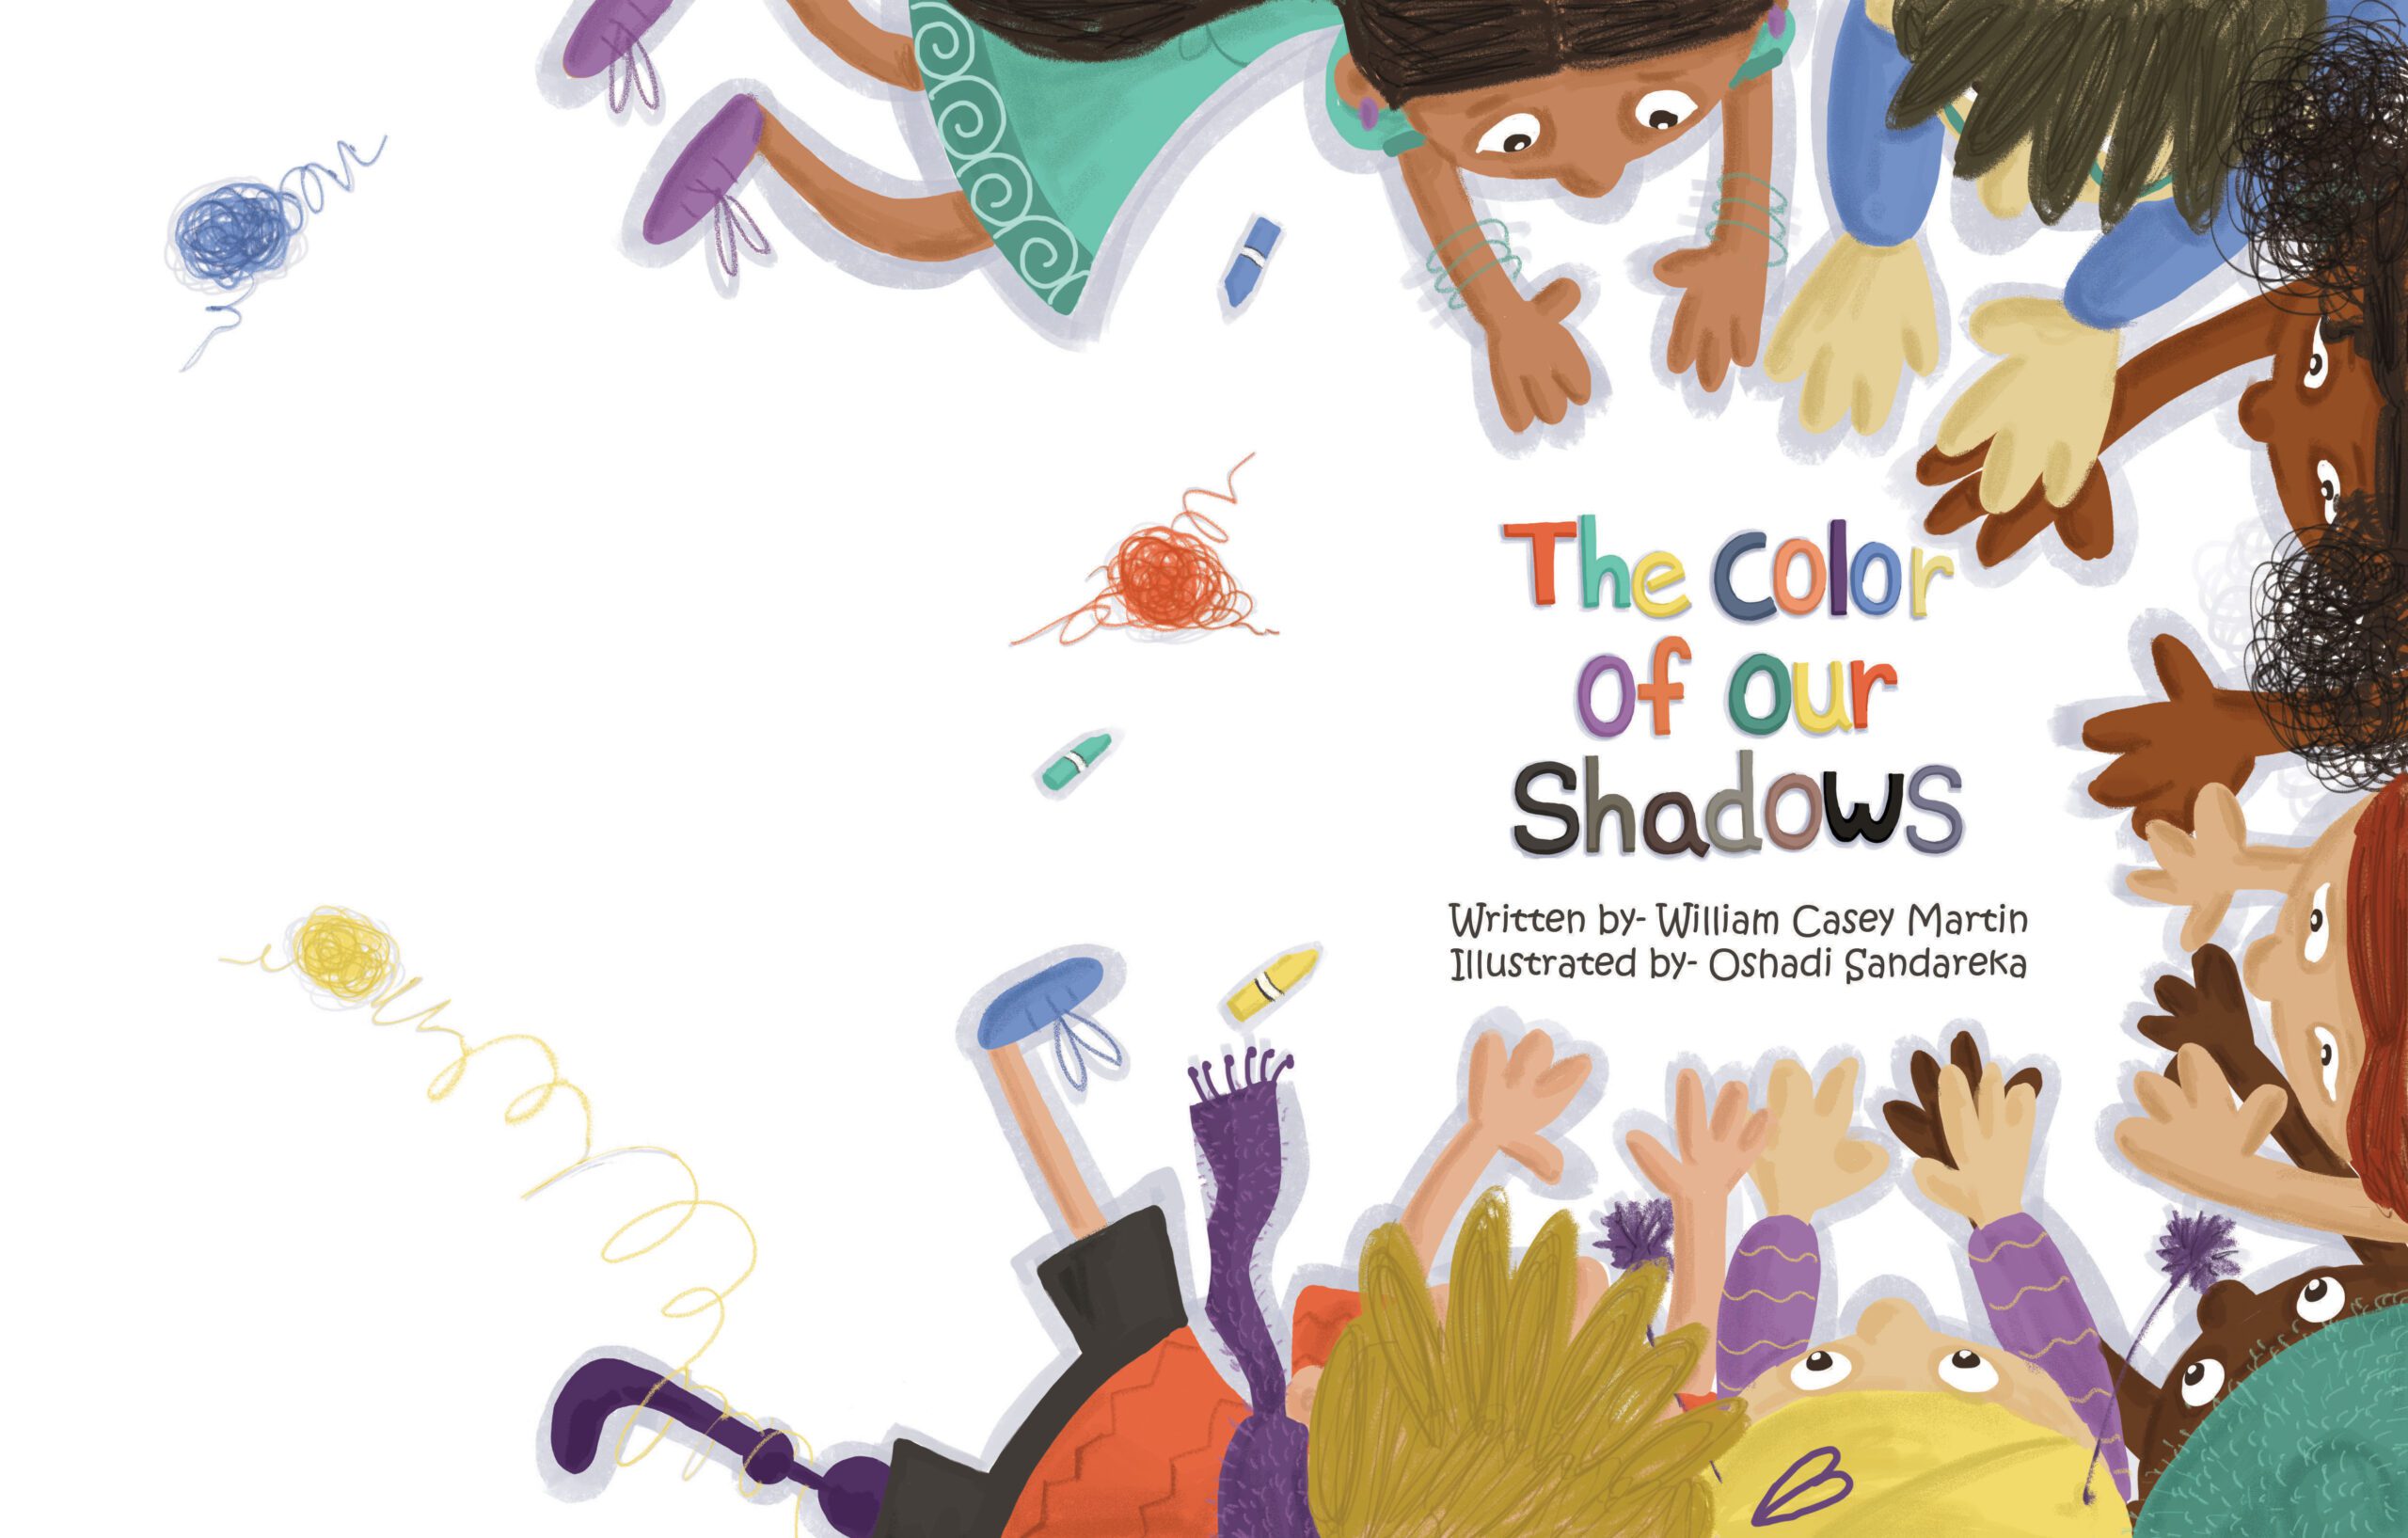 THE COLOR OF OUR SHADOWS